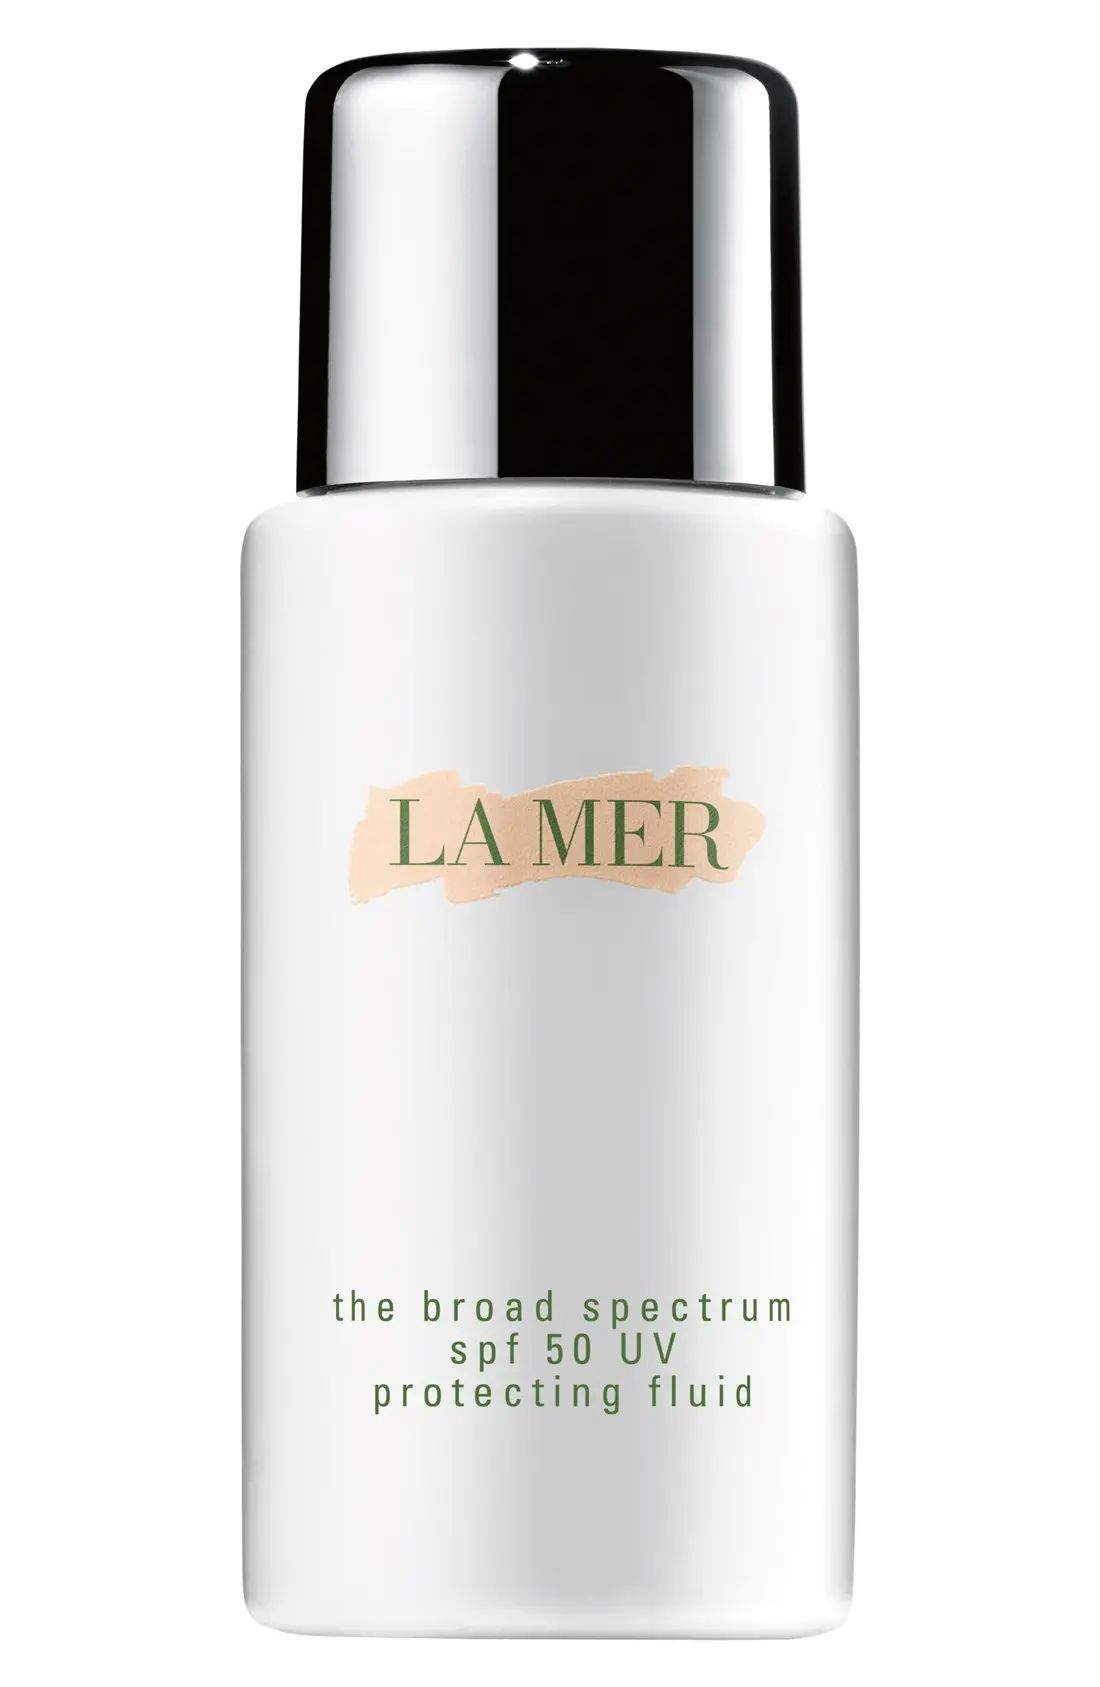 La Mer The Broad Spectrum Spf 50 Daily Uv Protecting Fluid Sunscreen, Size 1.7 oz | Nordstrom